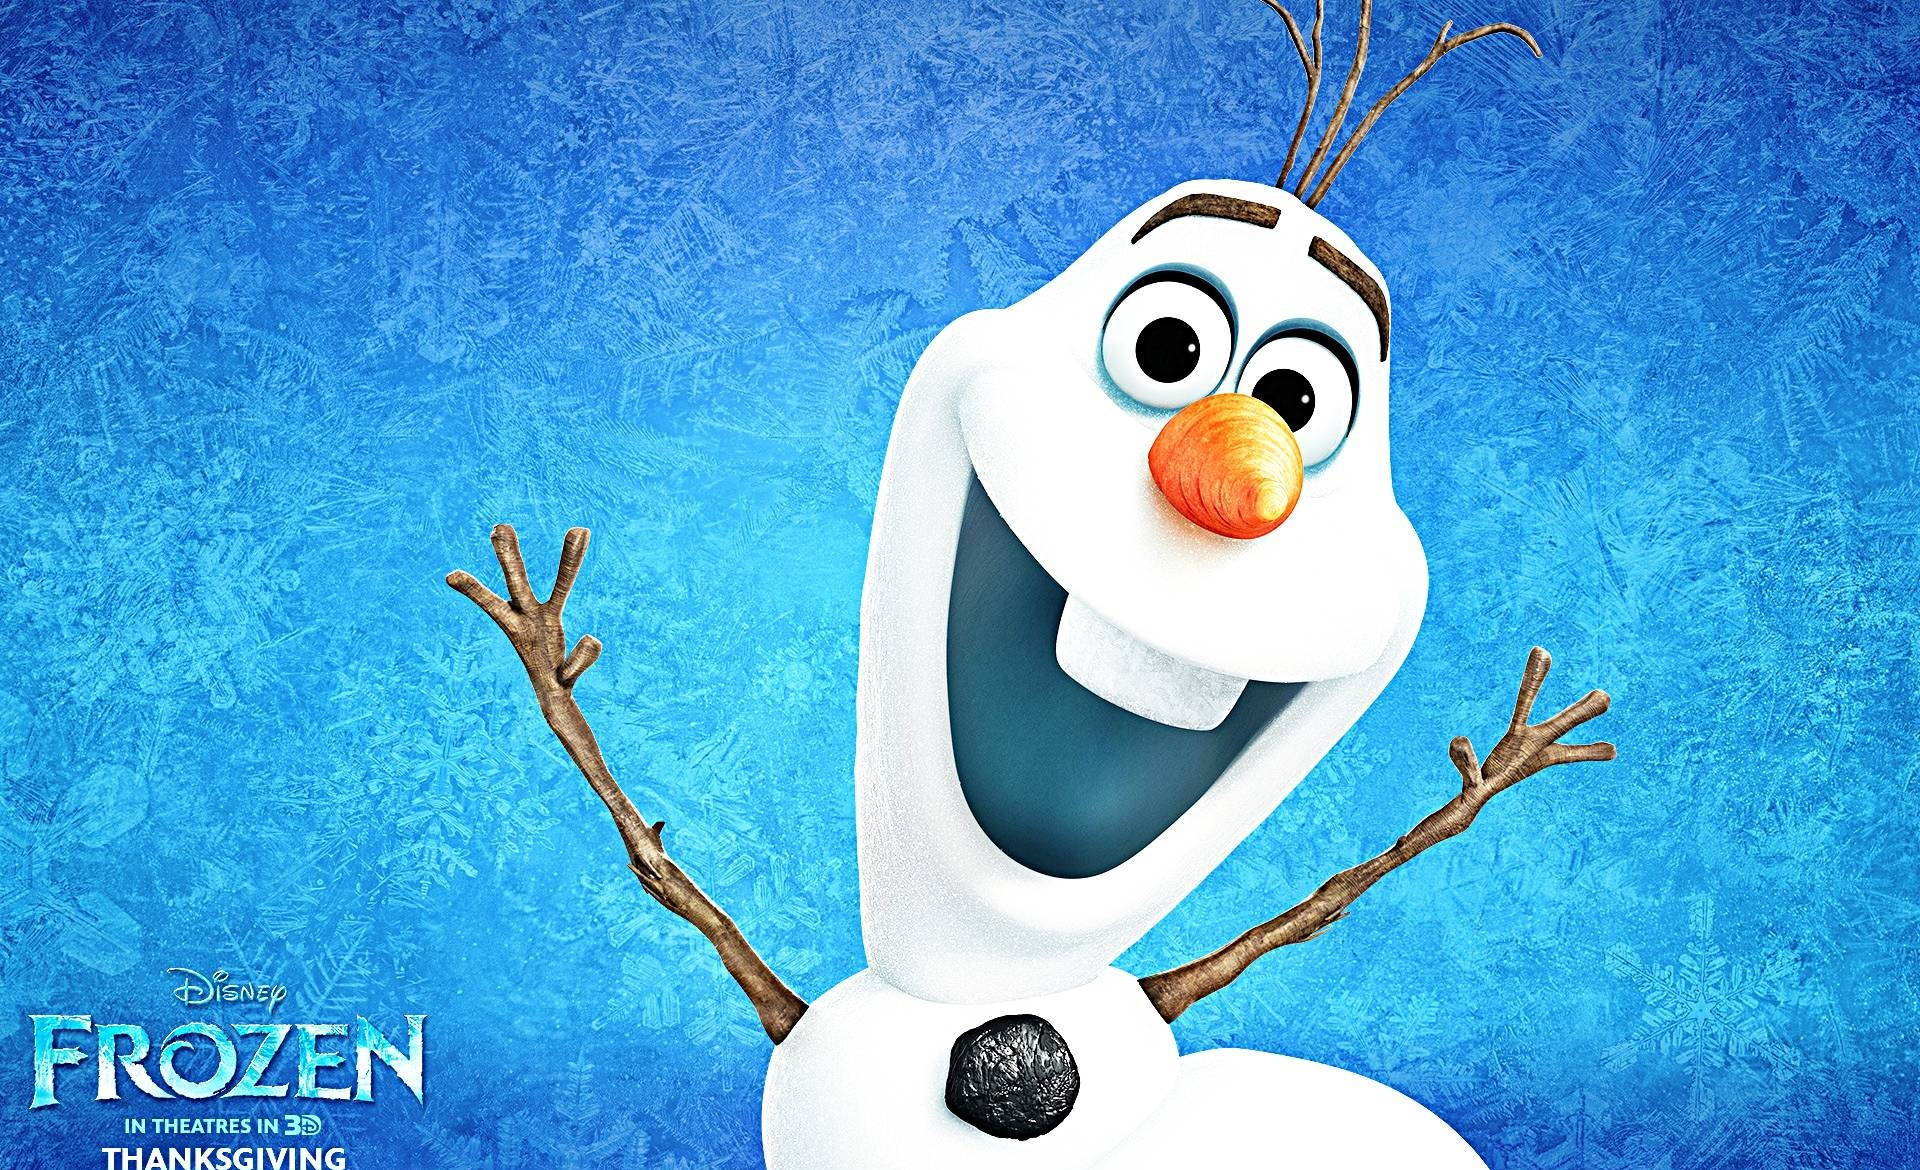 Disney Character Olaf The Snowman Wallpaper